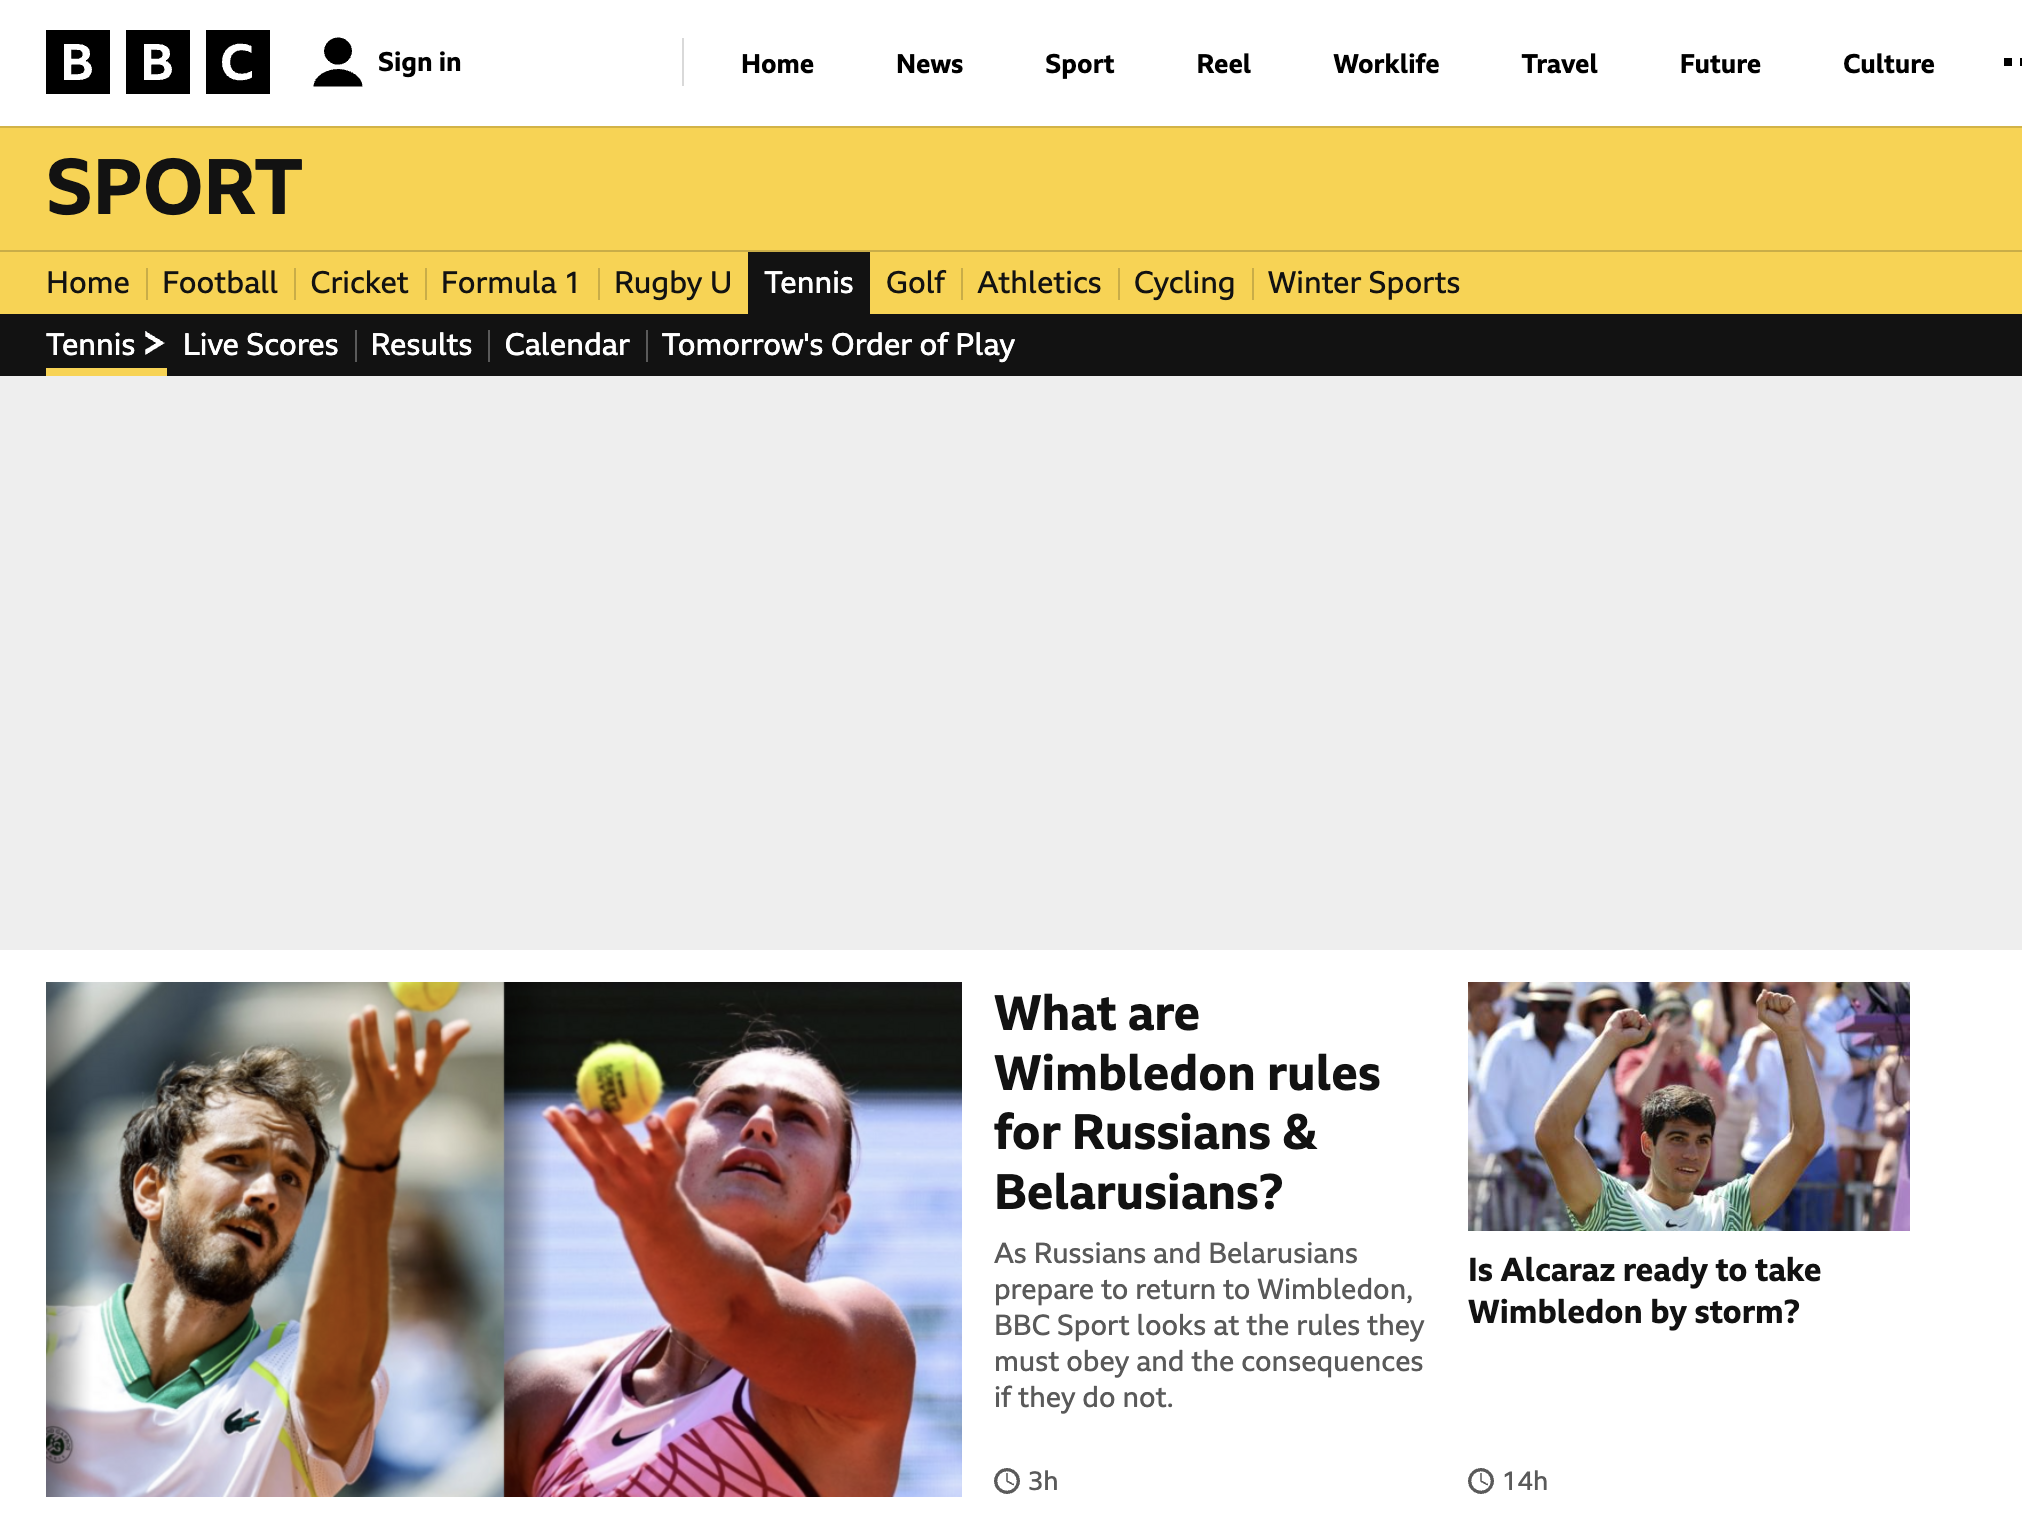 BBC SPORT, Tennis, Rules and Equipment